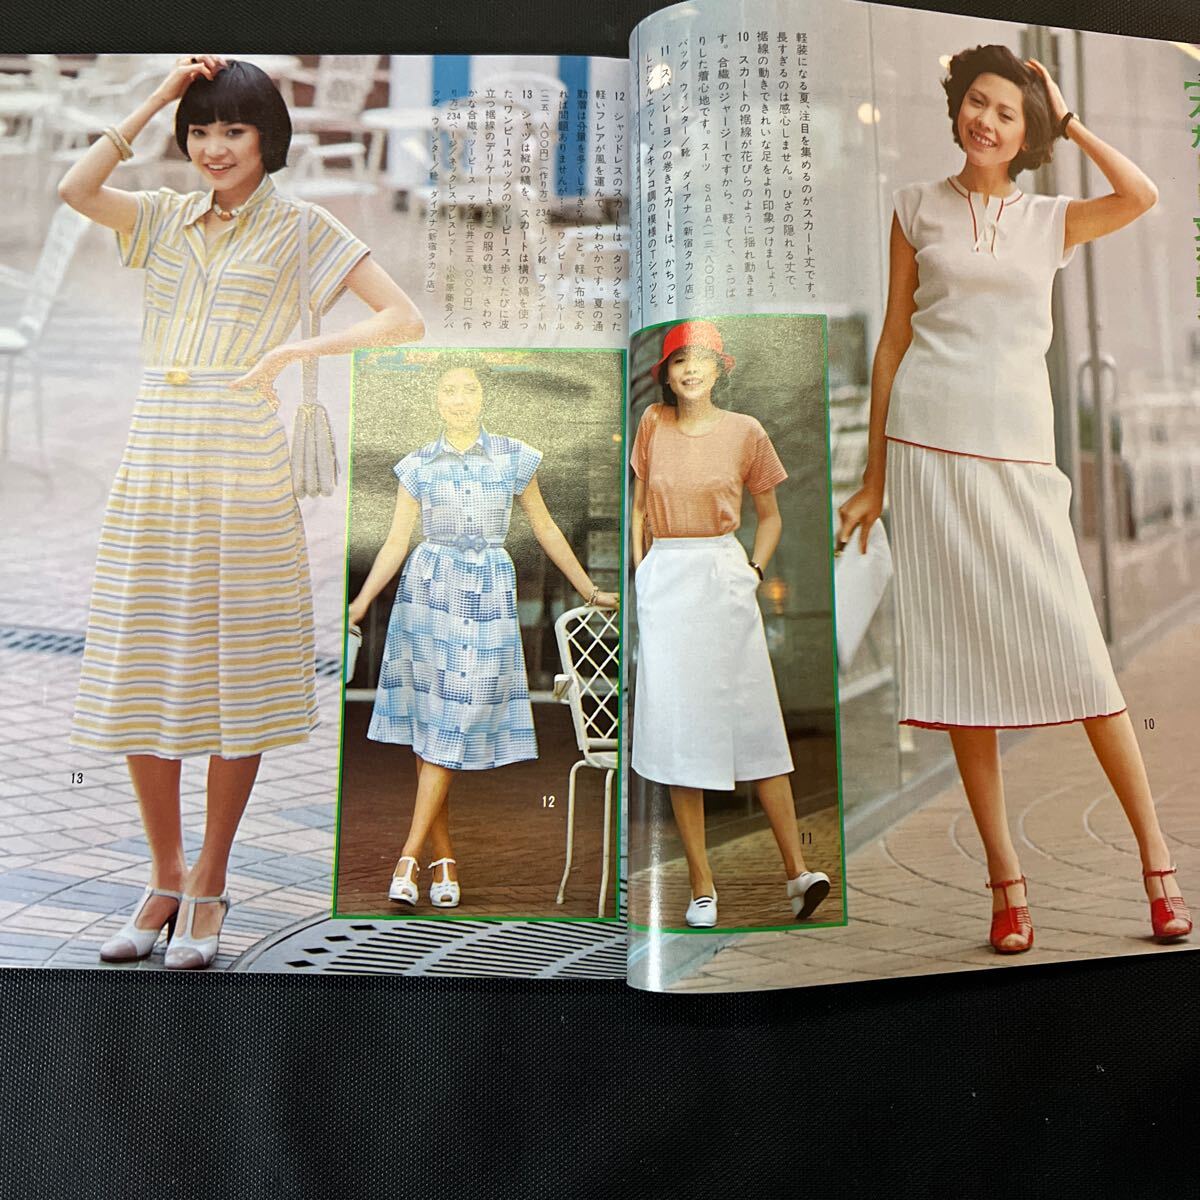  equipment . magazine so-en 1976 year 7 month number culture clothes equipment .. publish department Showa era 51 year that time thing Vintage rare retro secondhand book Showa Retro attire research yukata 